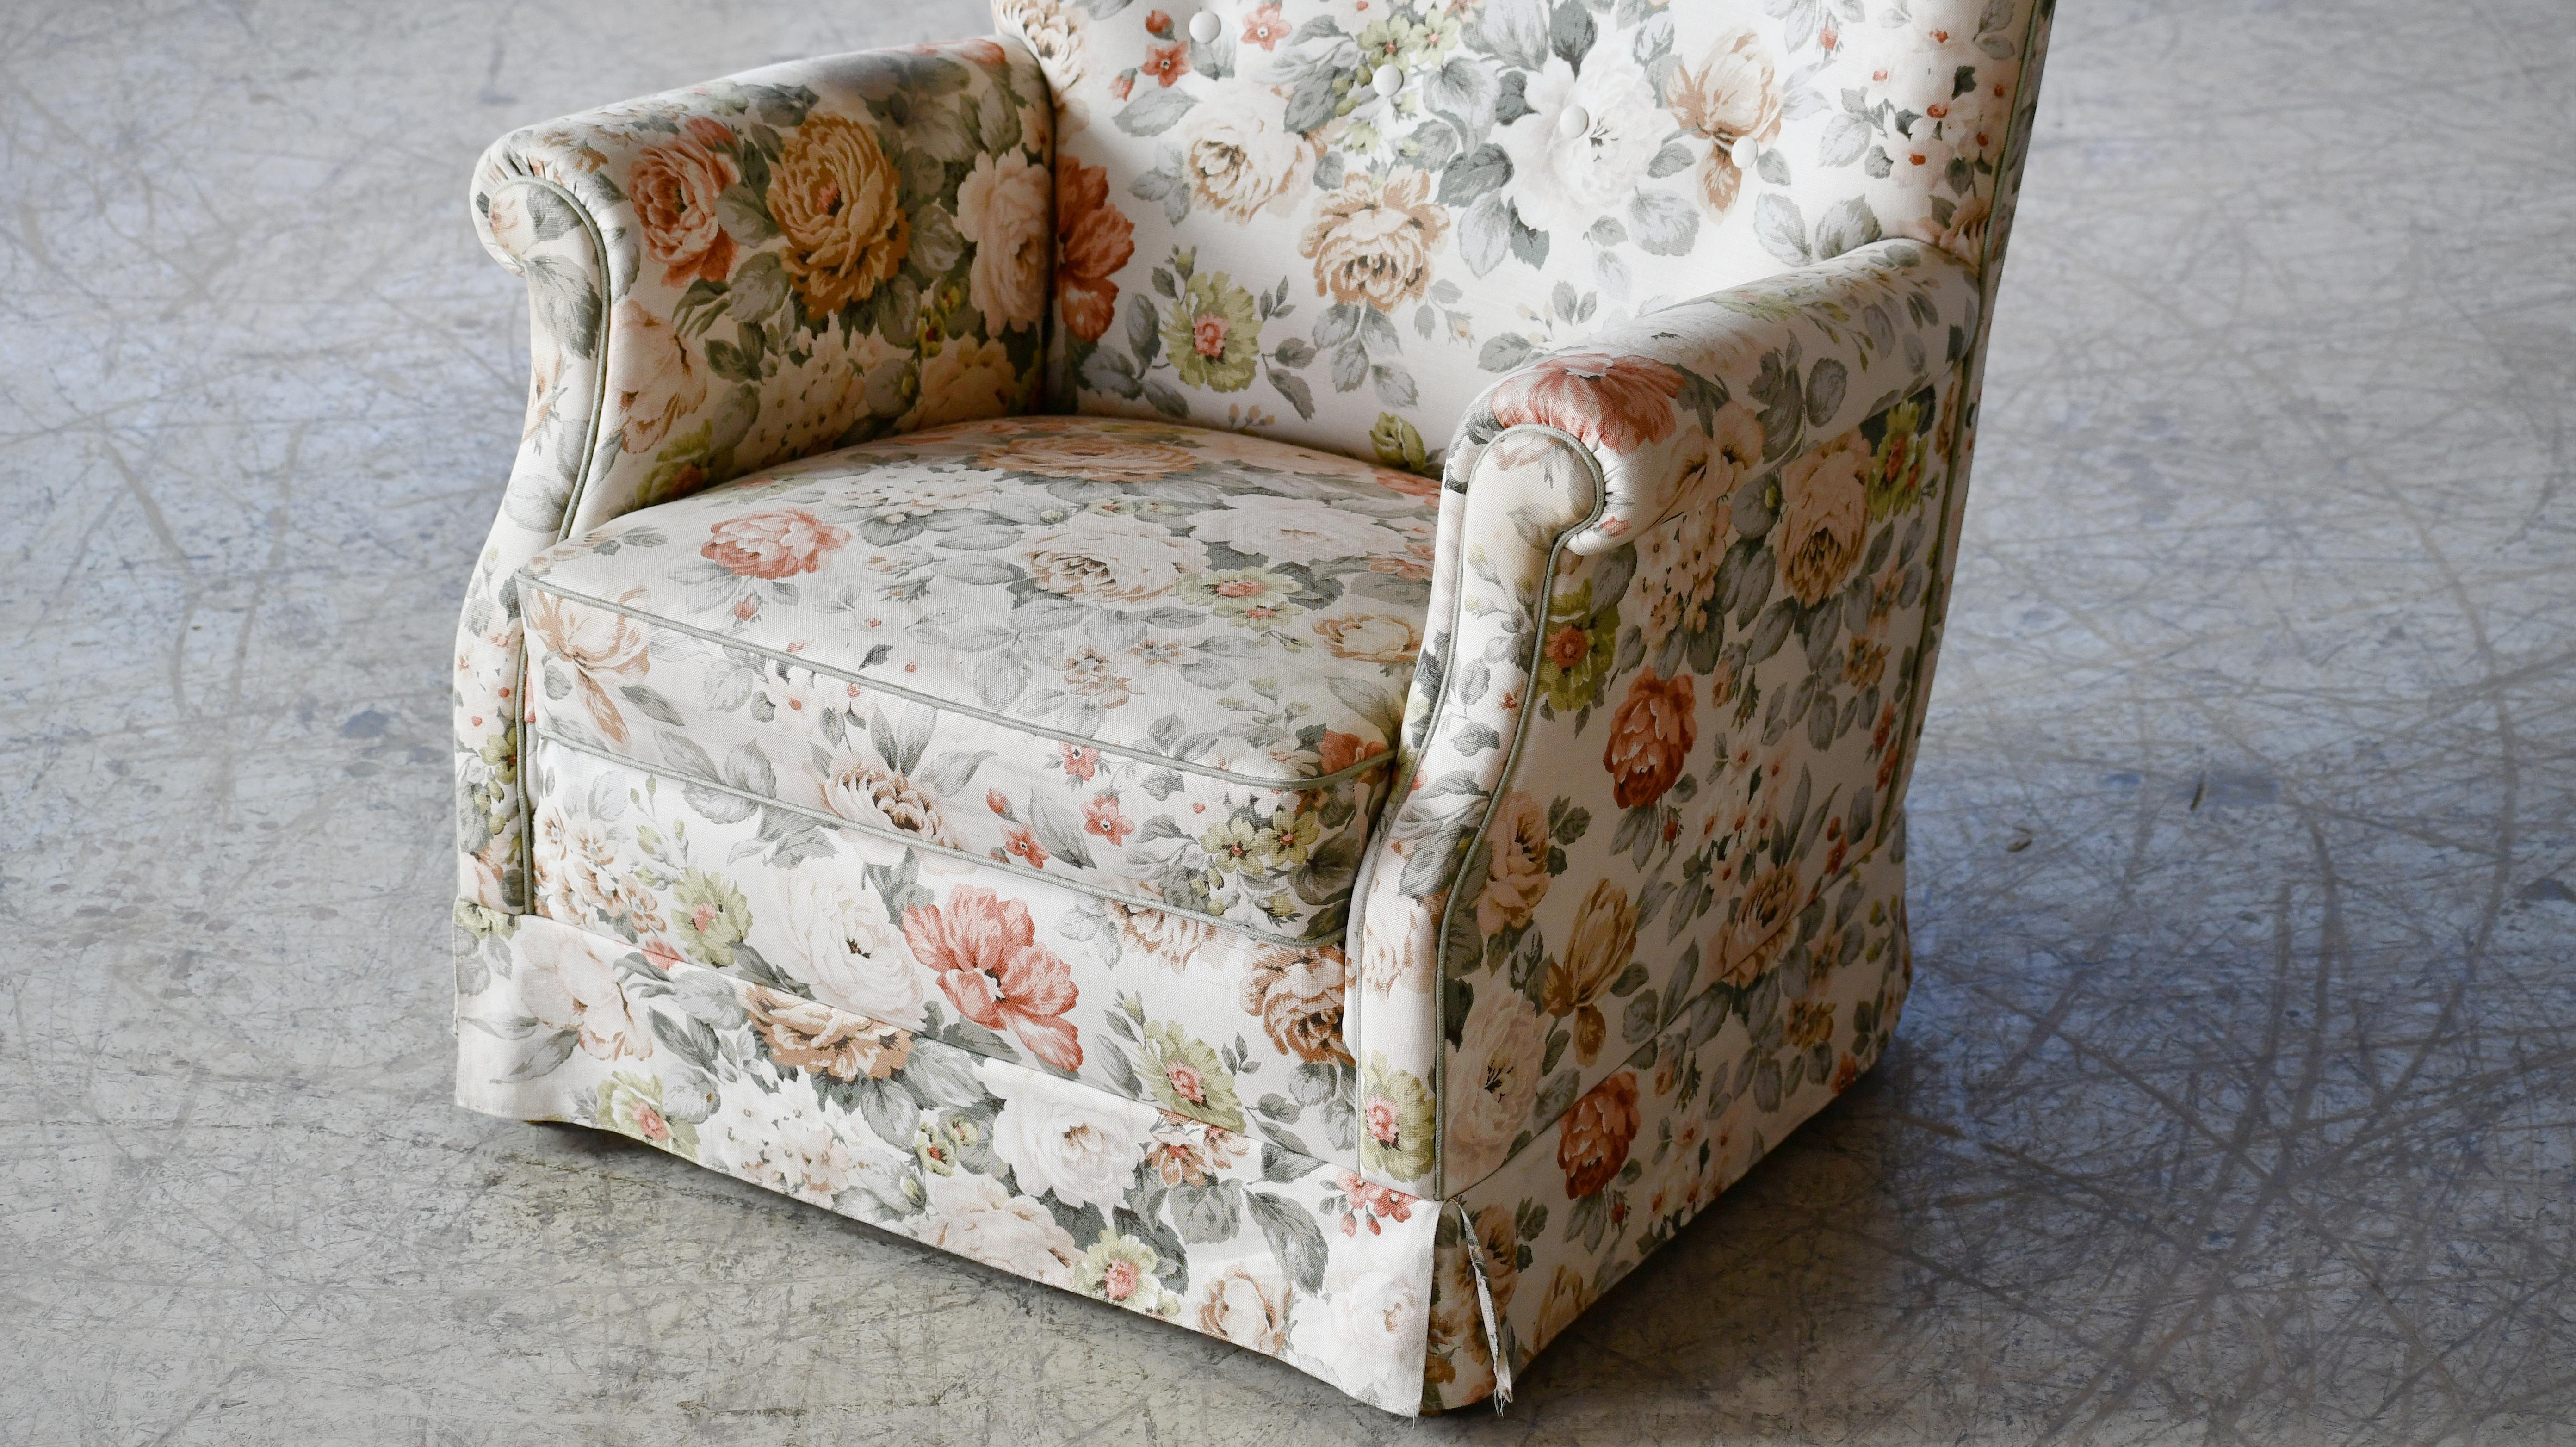 Pair of Danish 1950s Medium Size Lounge Chairs in Floral Fabric and Skirts For Sale 1